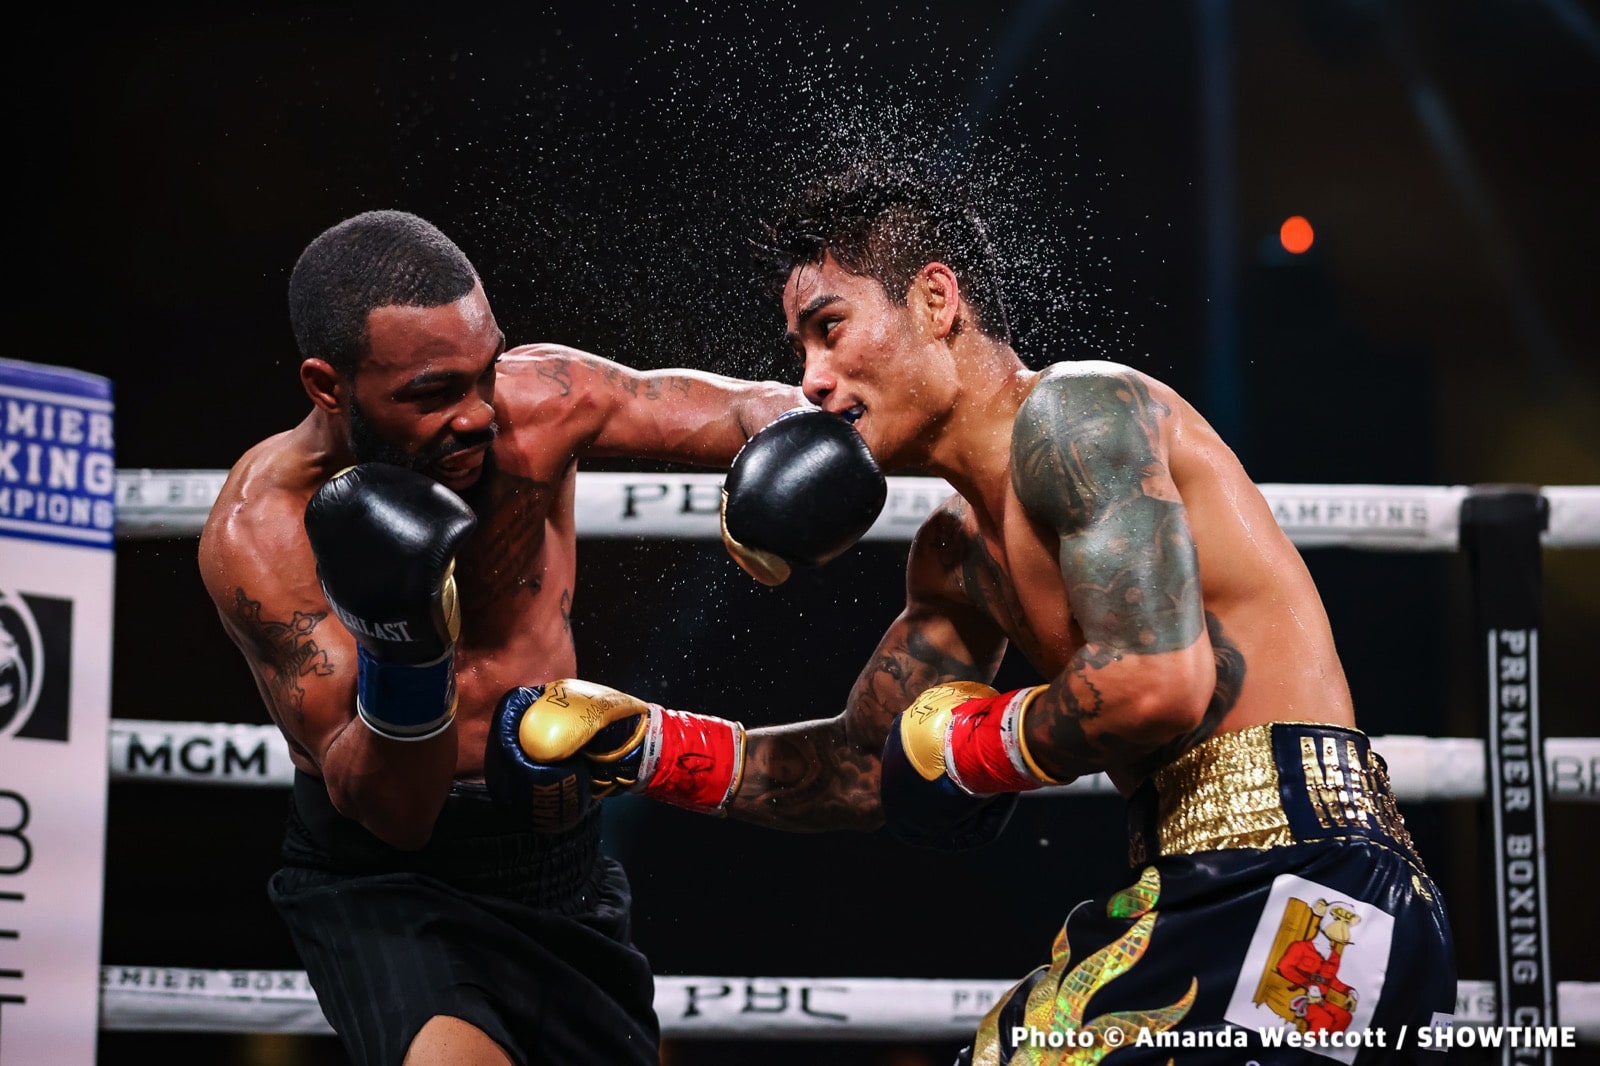 Image: Gary Russell Jr: 'I Beat' Magsayo 10 to 2, claims robbery